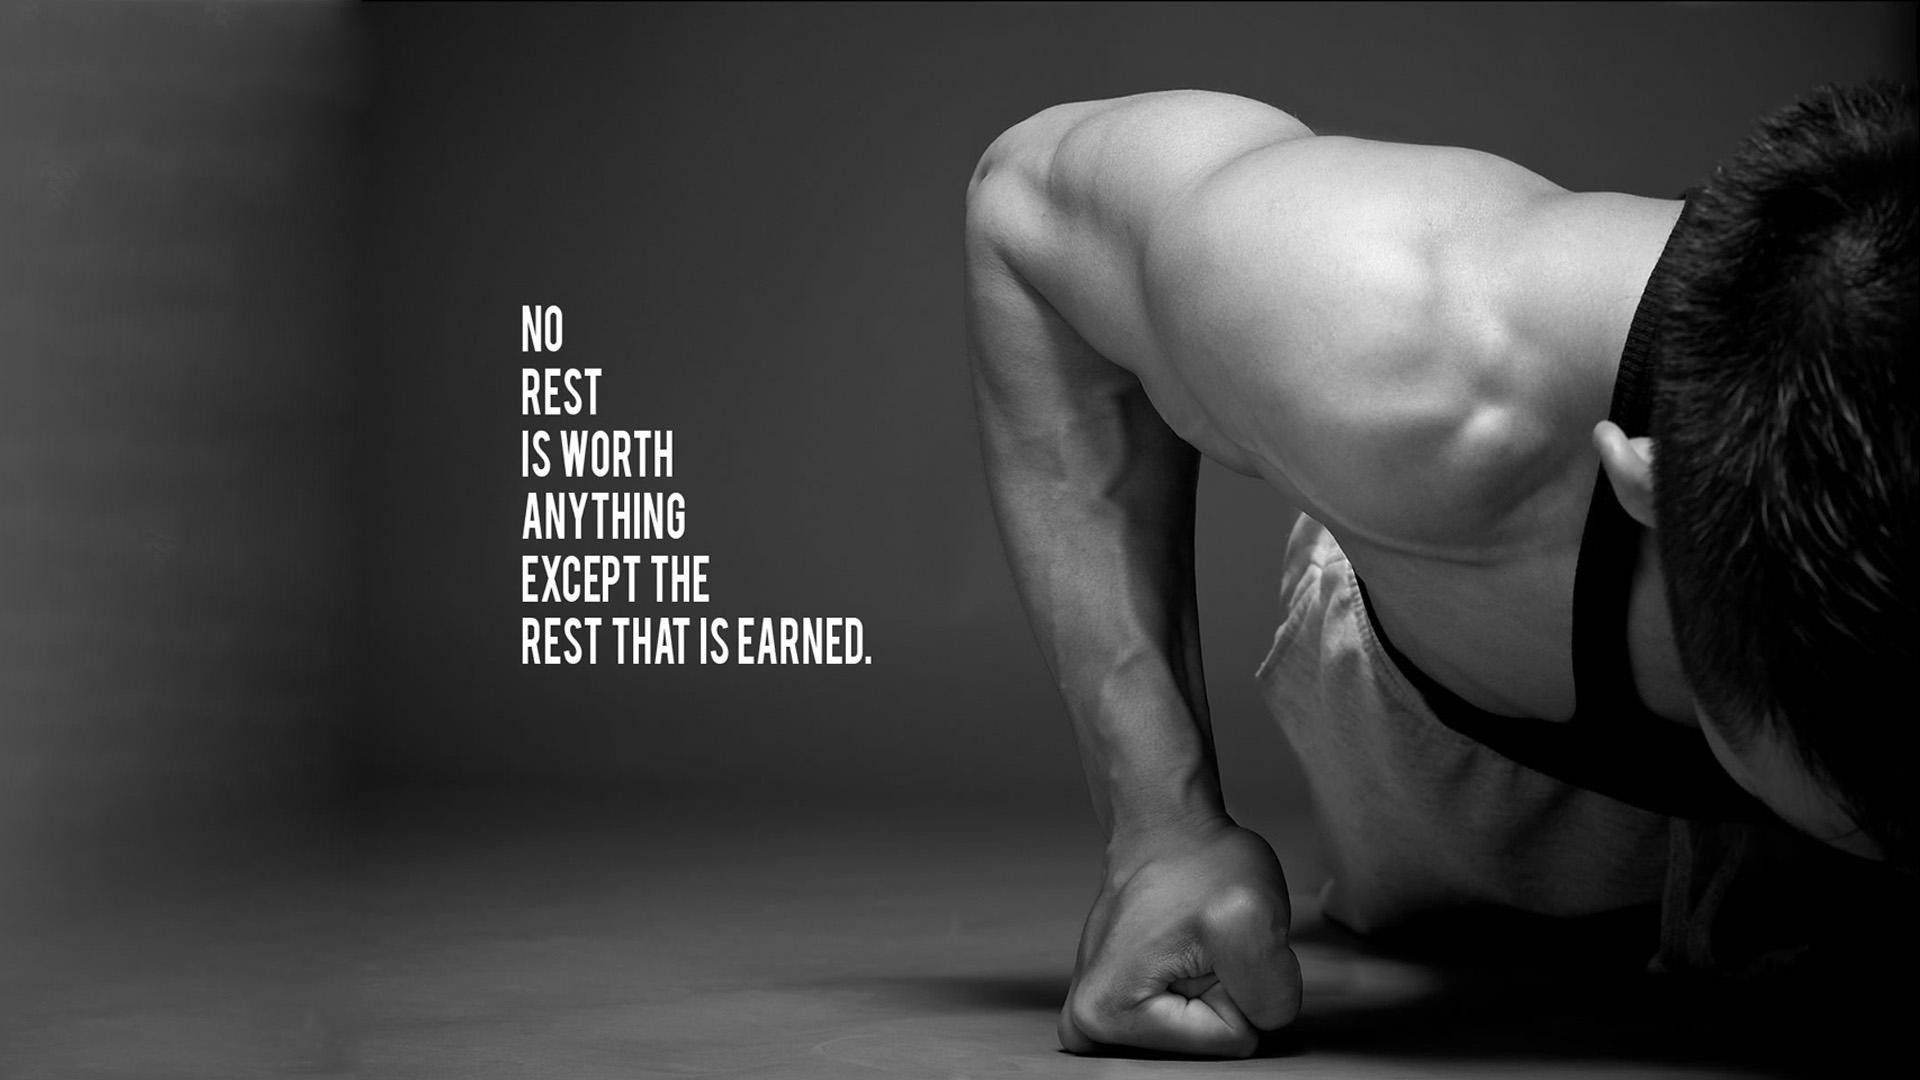 Motivational workout quotes guys 39 best motivational quotes for men image motivational quotes